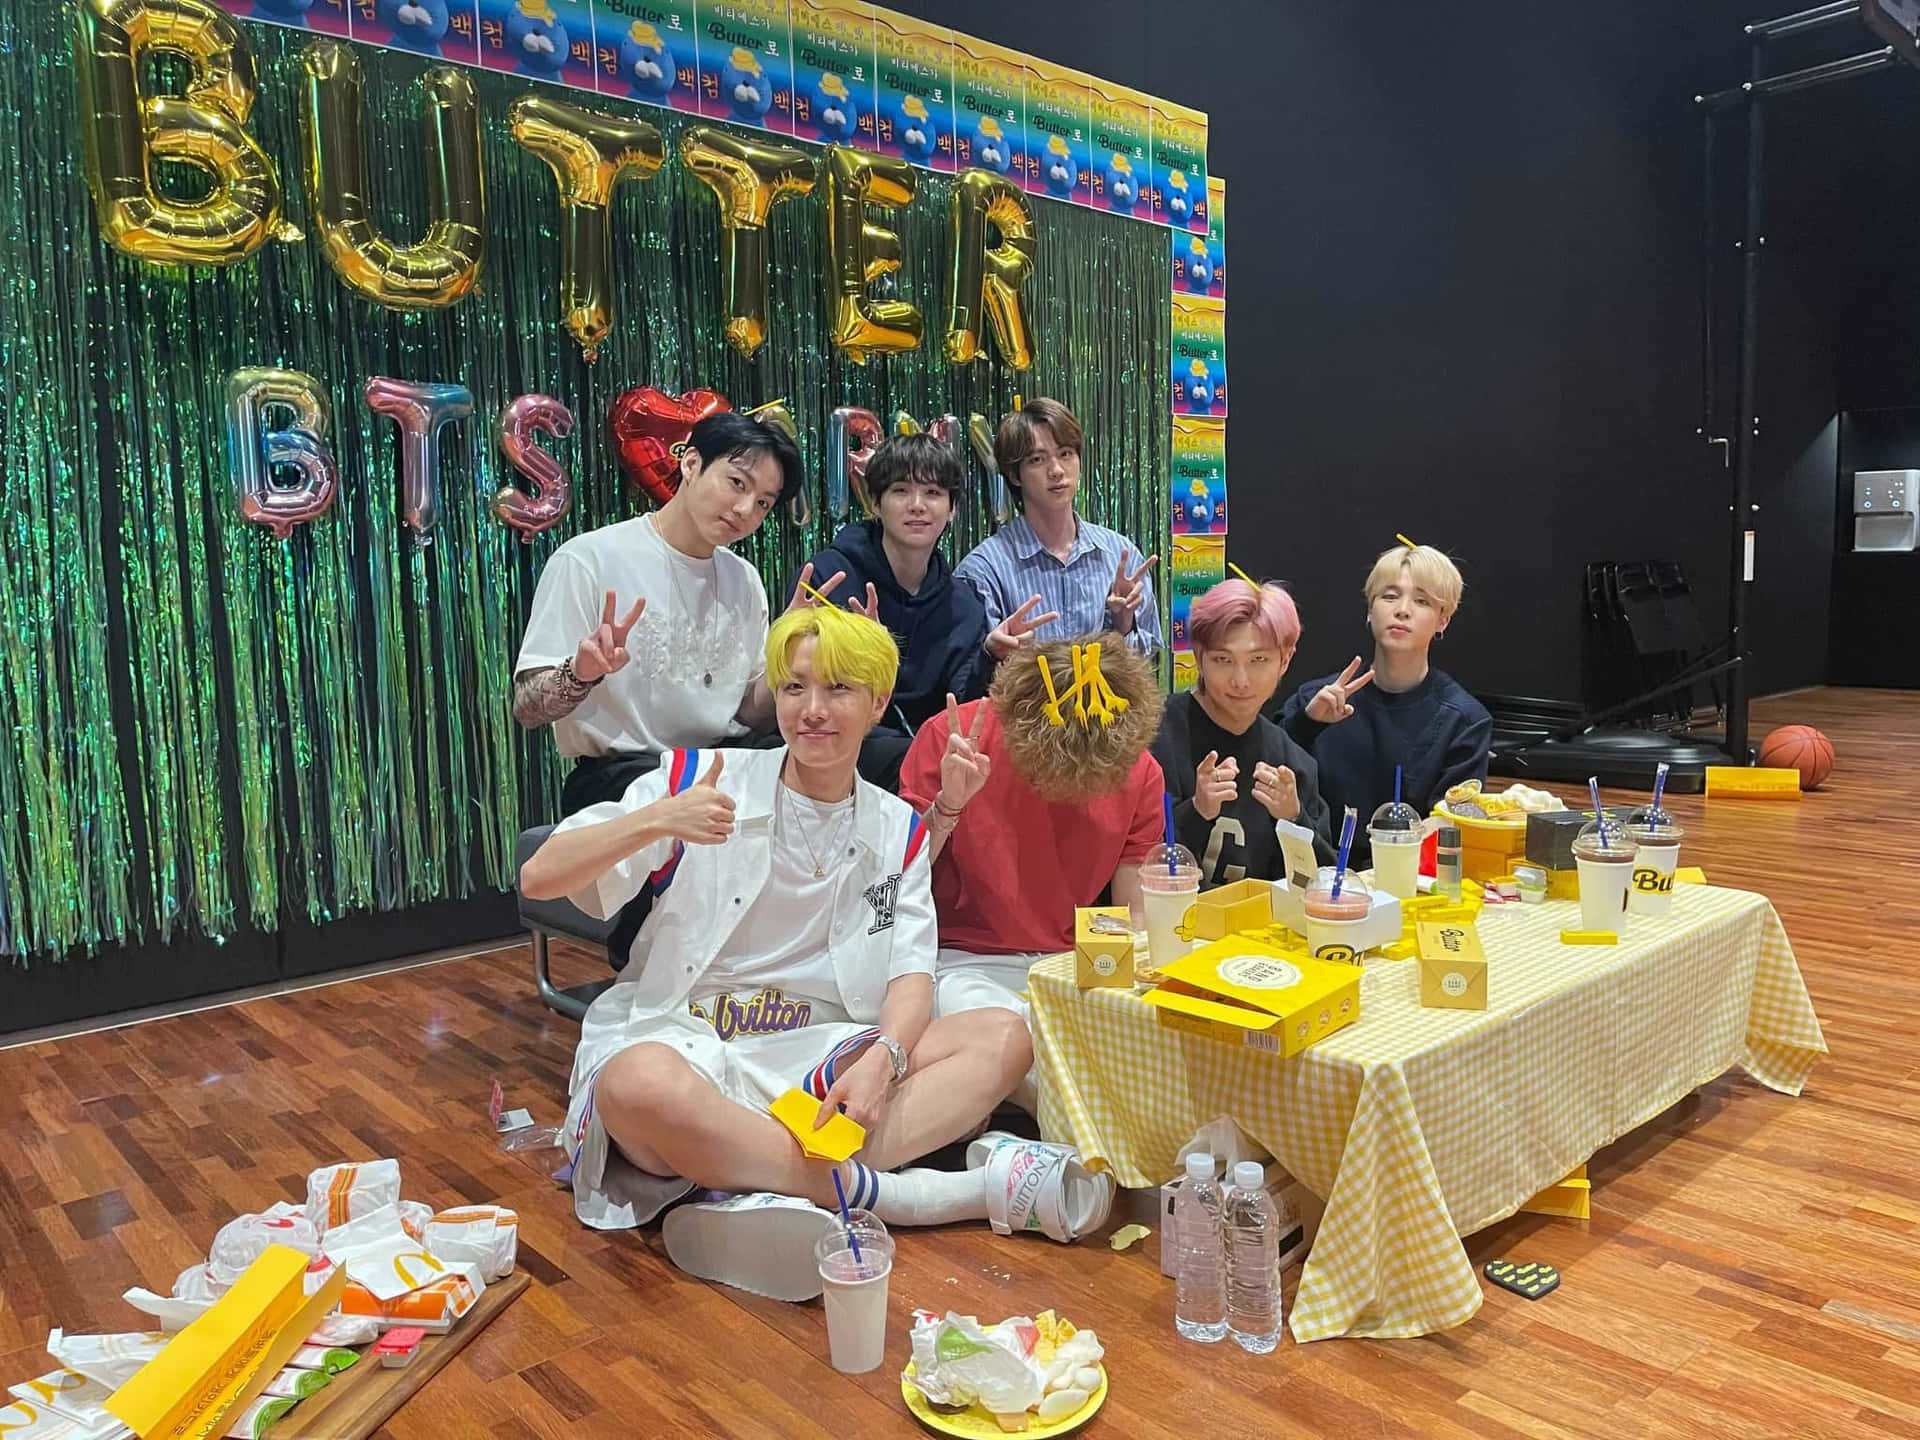 Come join in on the fun of BTS Butter and witness the fireworks!